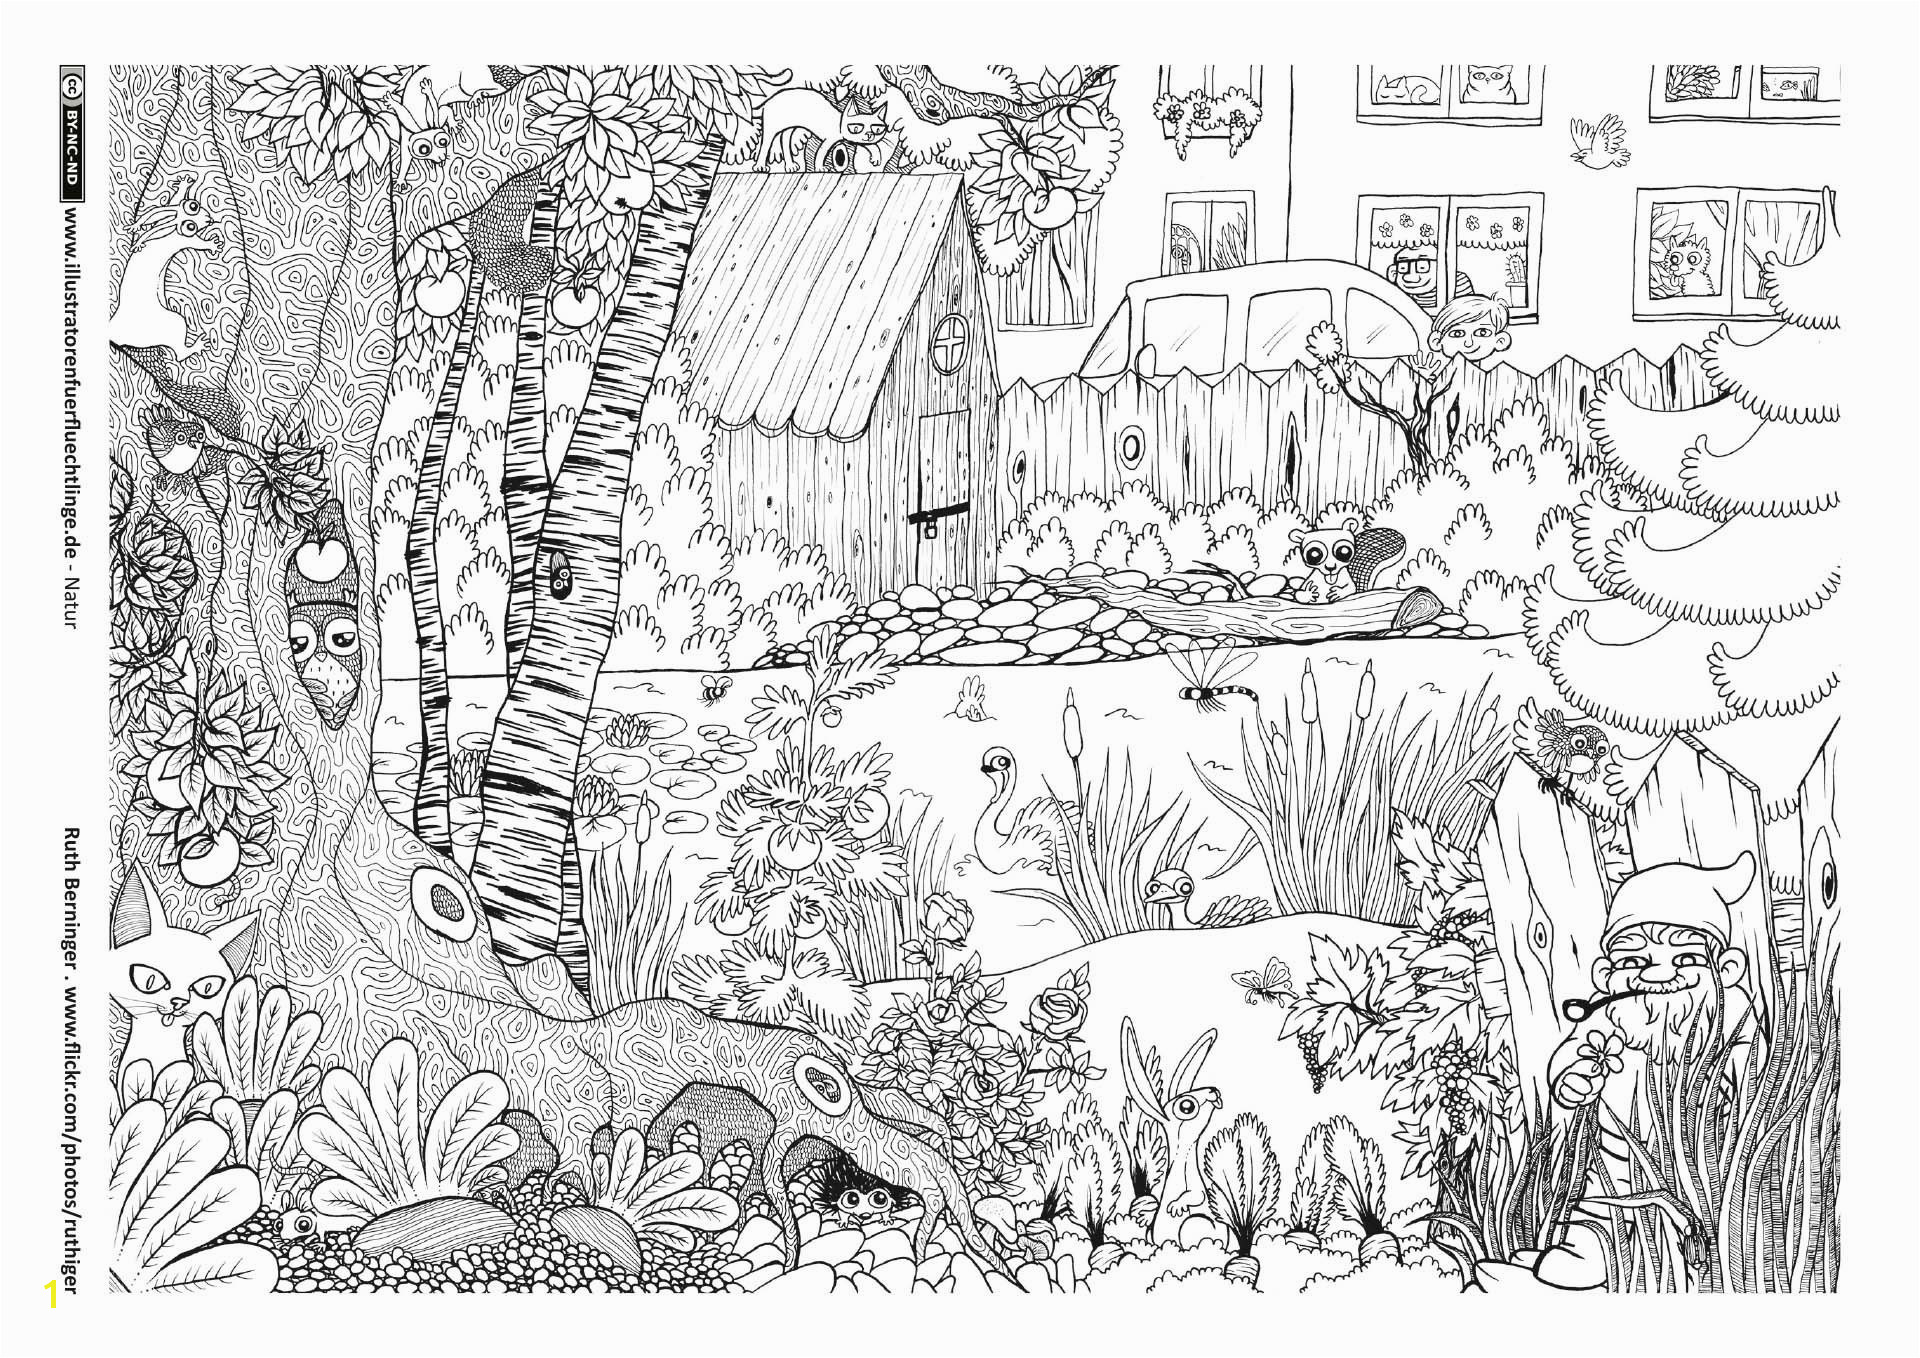 Coloring Pages for Adults with Hidden Objects Garten Tiere Wimmelbild … Malen